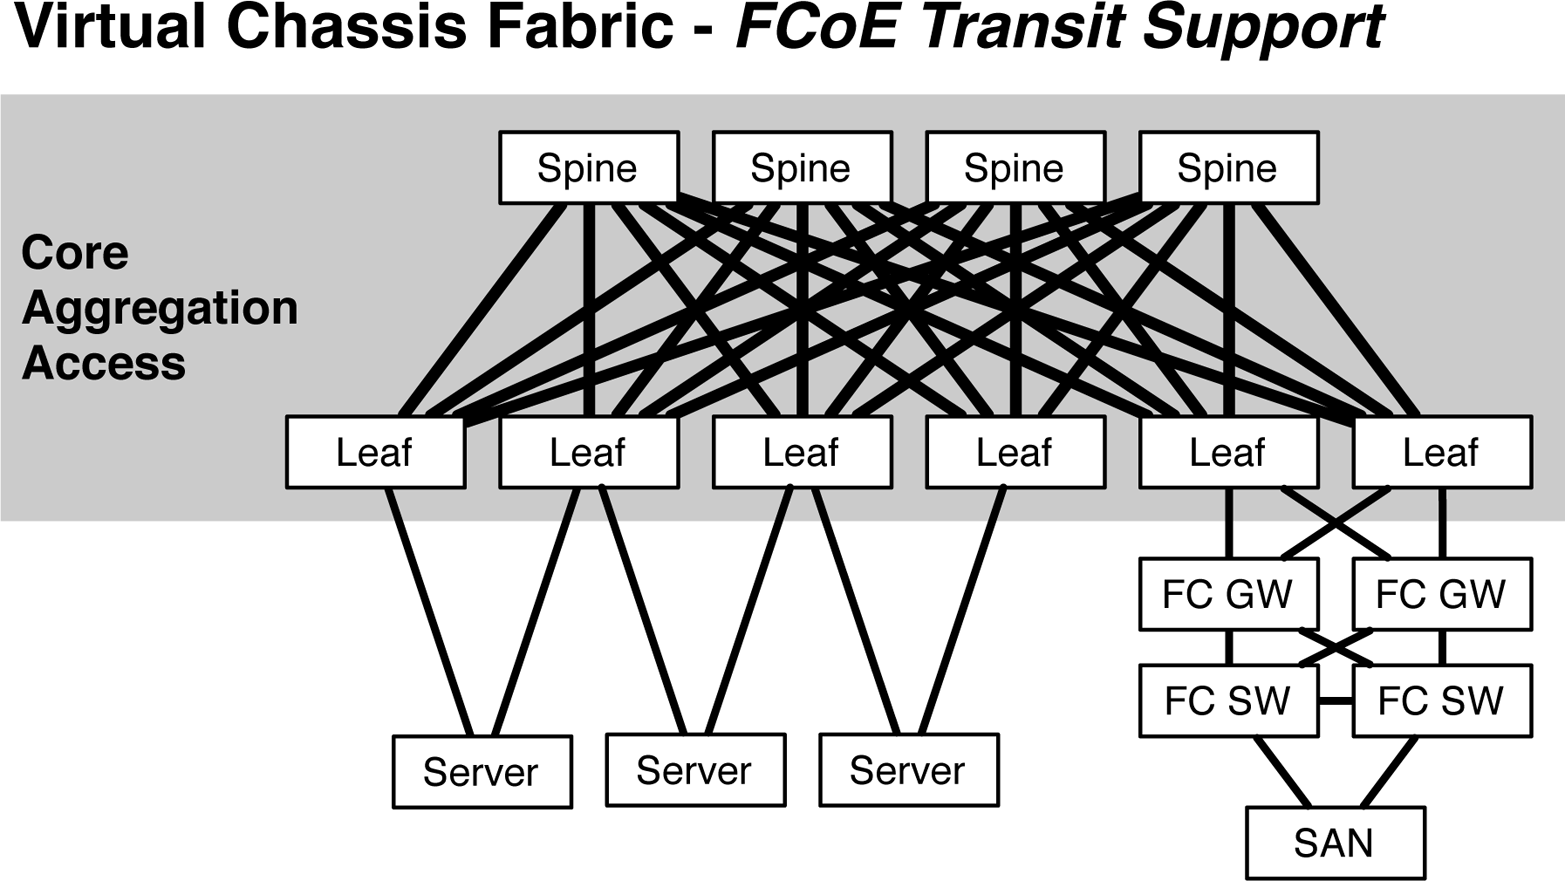 FCoE transit with VCF